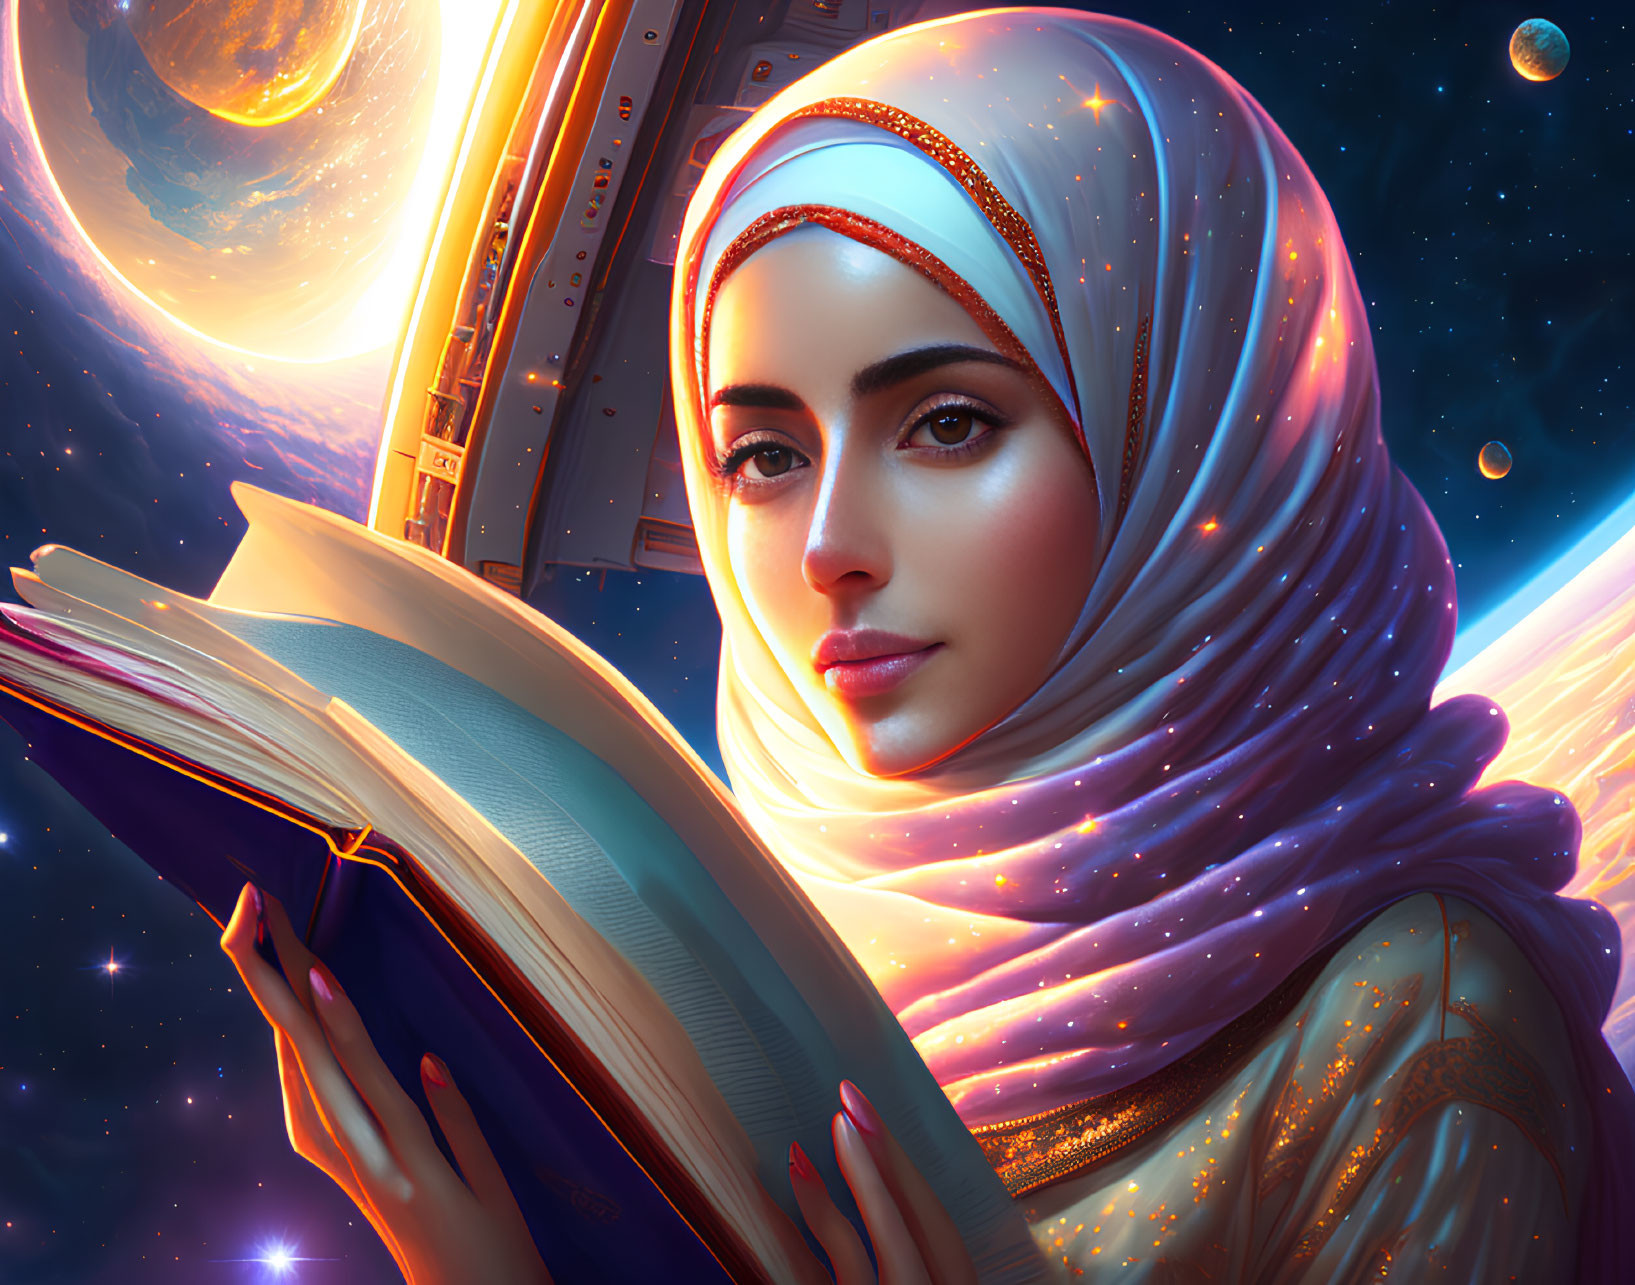 Woman in hijab reading book with cosmic backdrop.